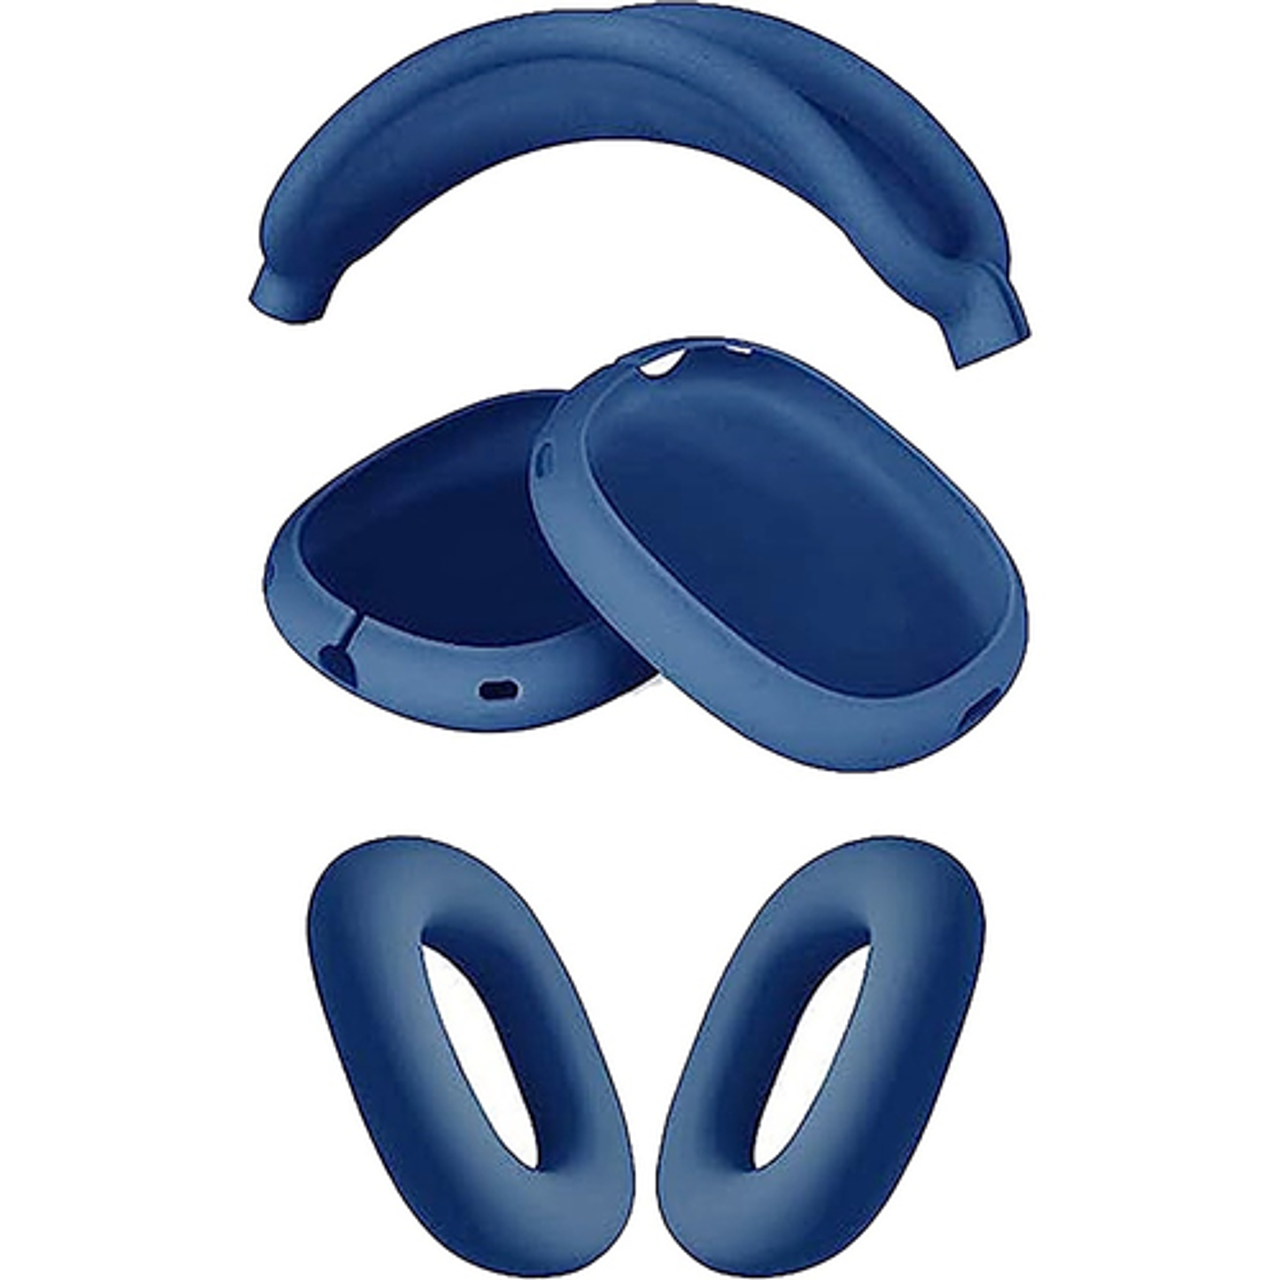 SaharaCase - Silicone Combo Kit Case for Apple AirPods Max Headphones - Blue